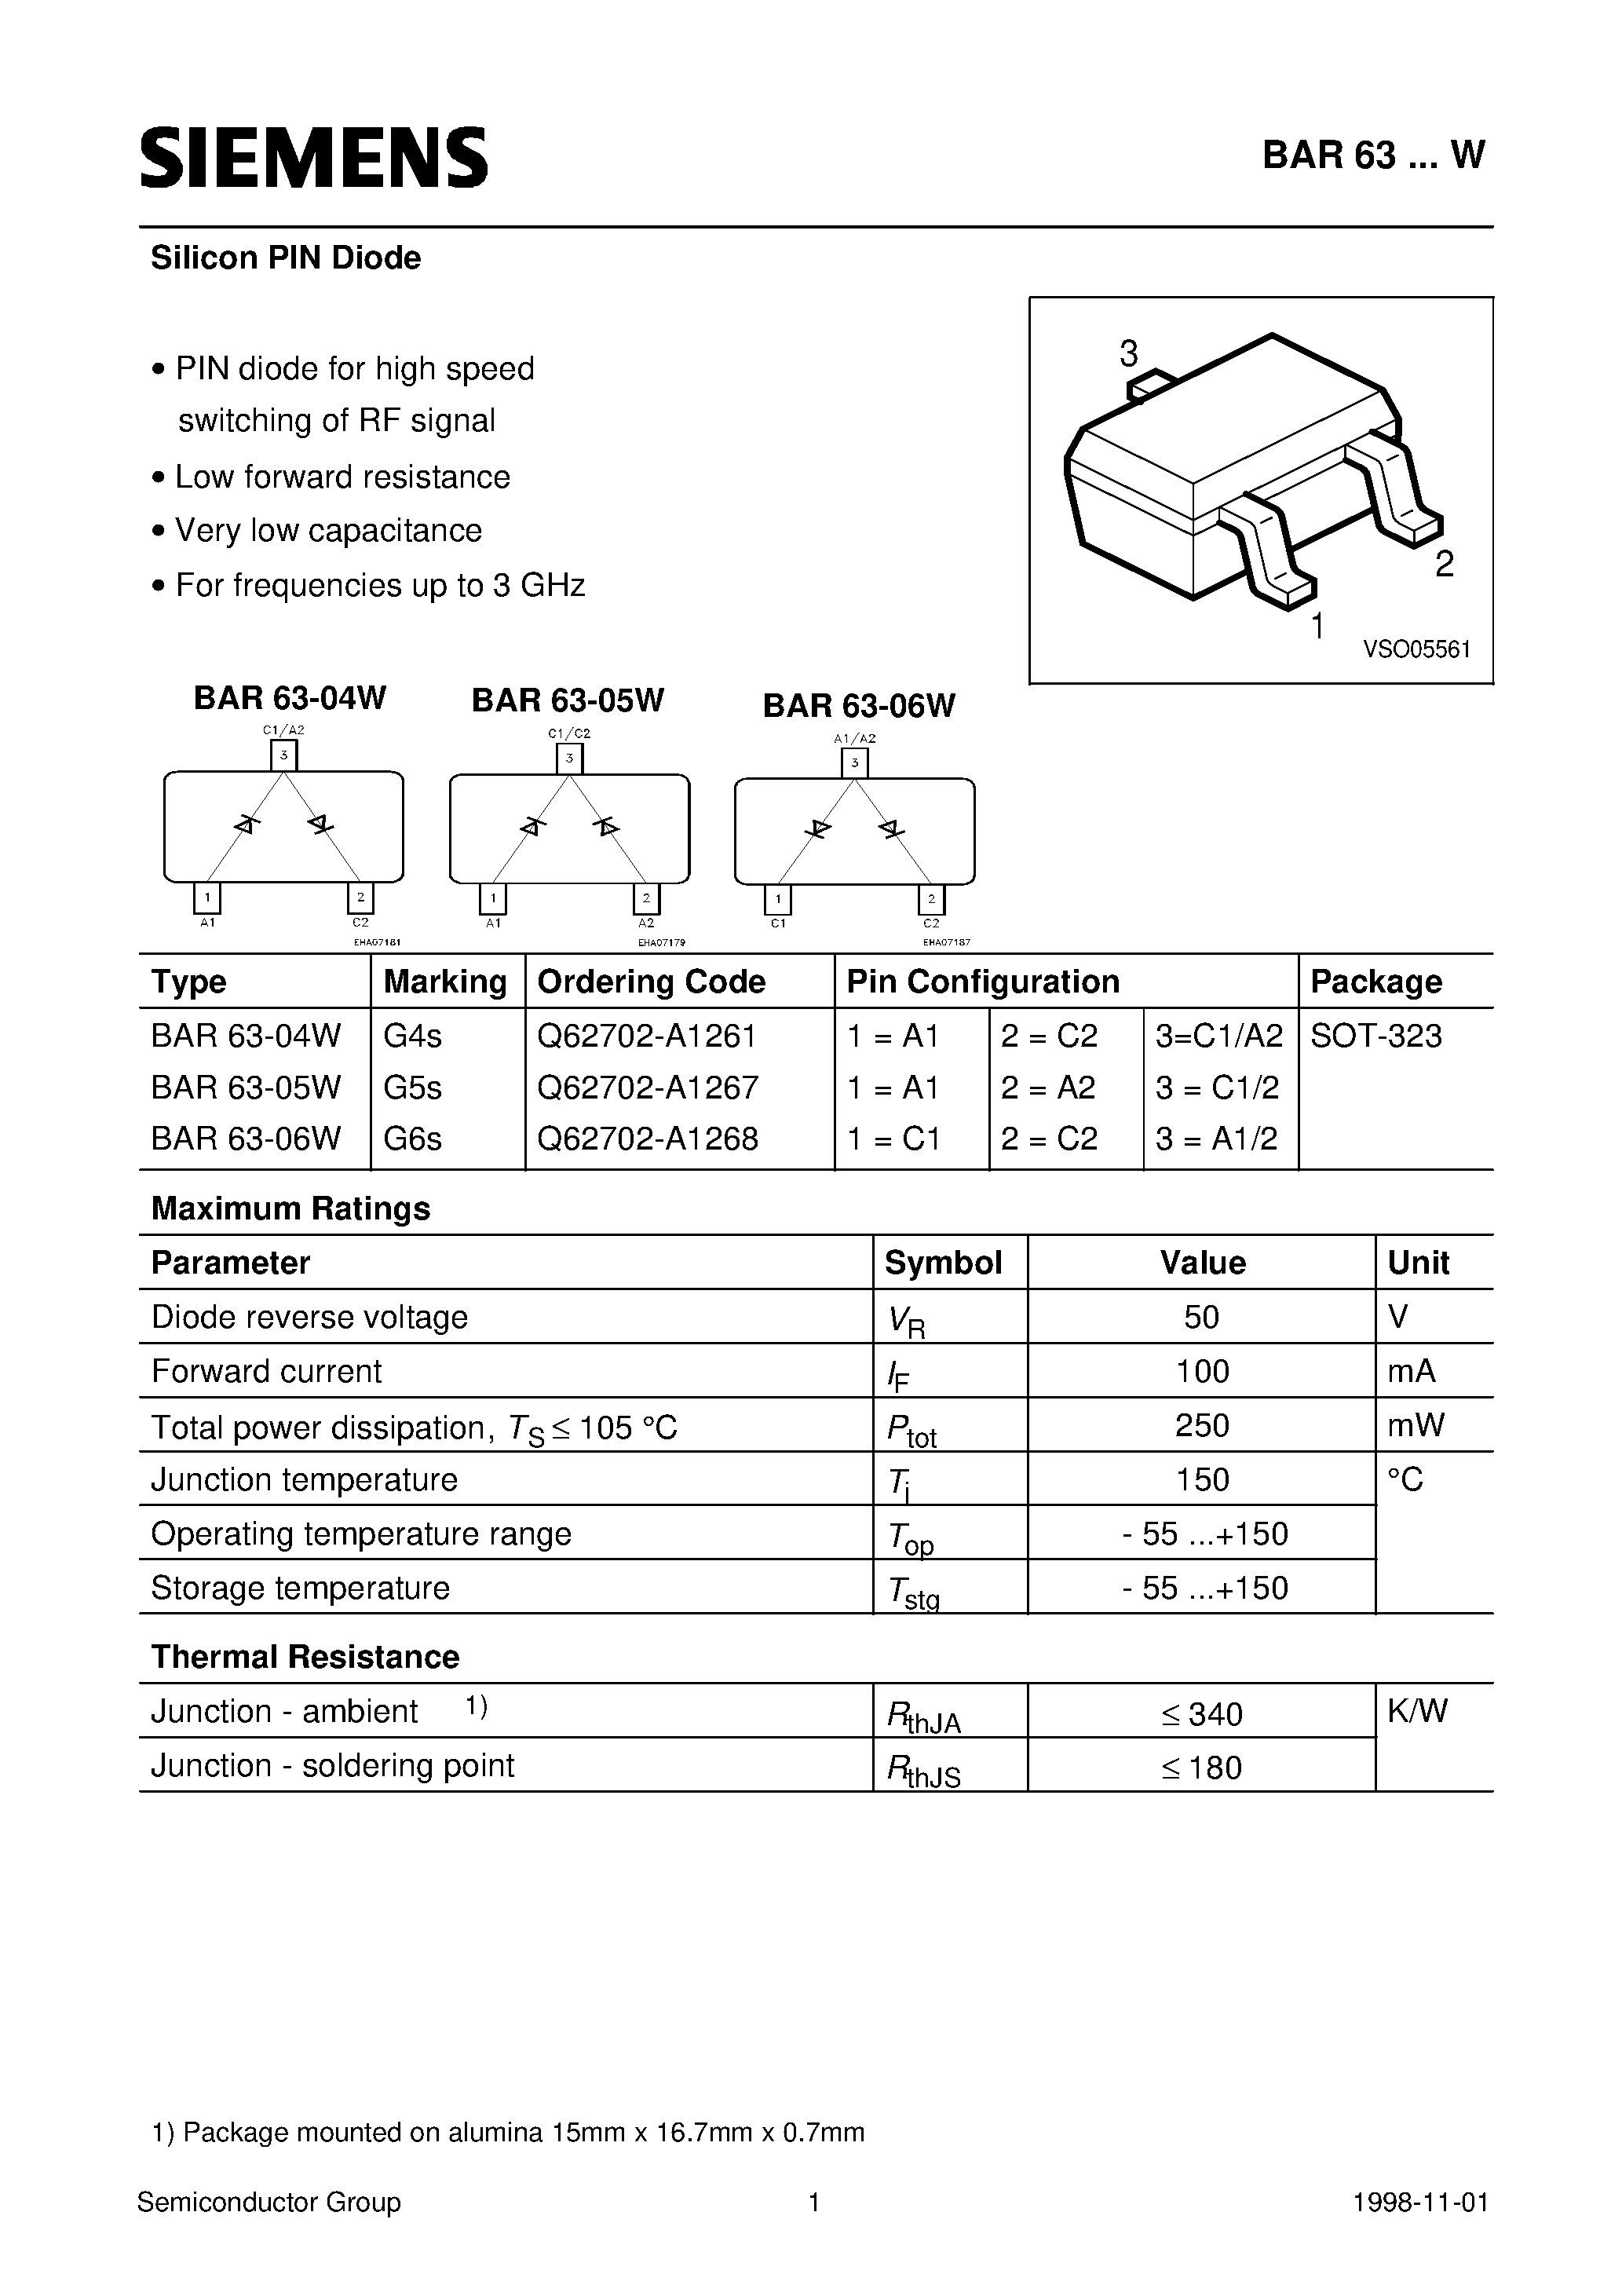 Даташит BAR63-W - Silicon PIN Diode (PIN diode for high speed switching of RF signal Low forward resistance Very low capacitance For frequencies up to 3 GHz) страница 1